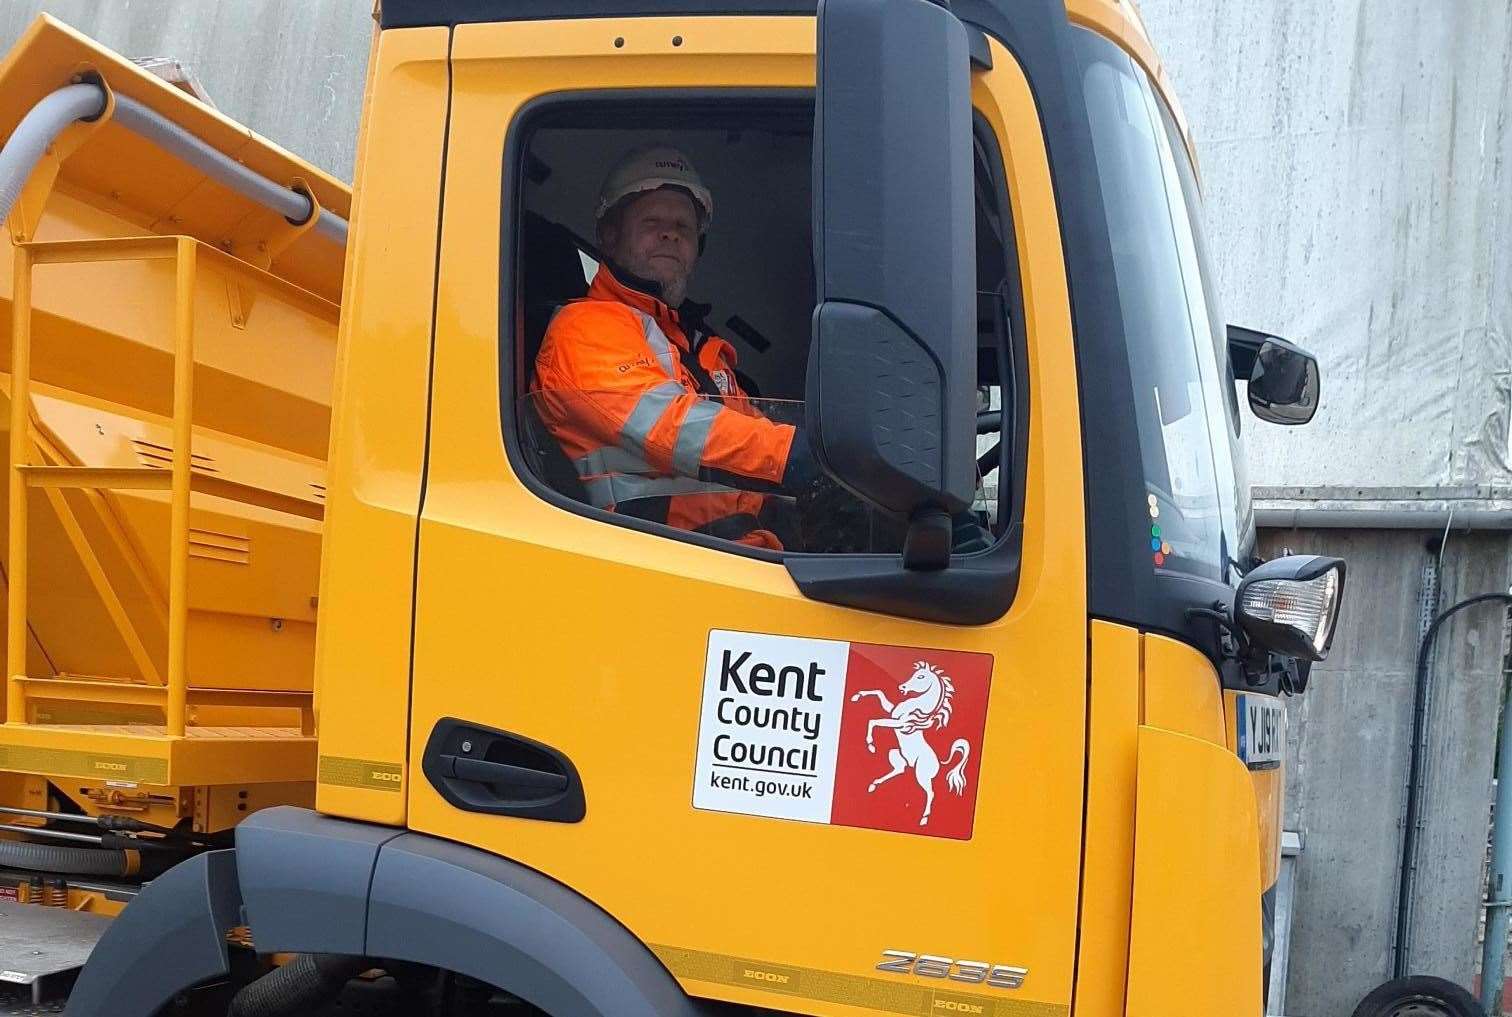 Chris Court has been gritting Kent's roads for almost 25 years.